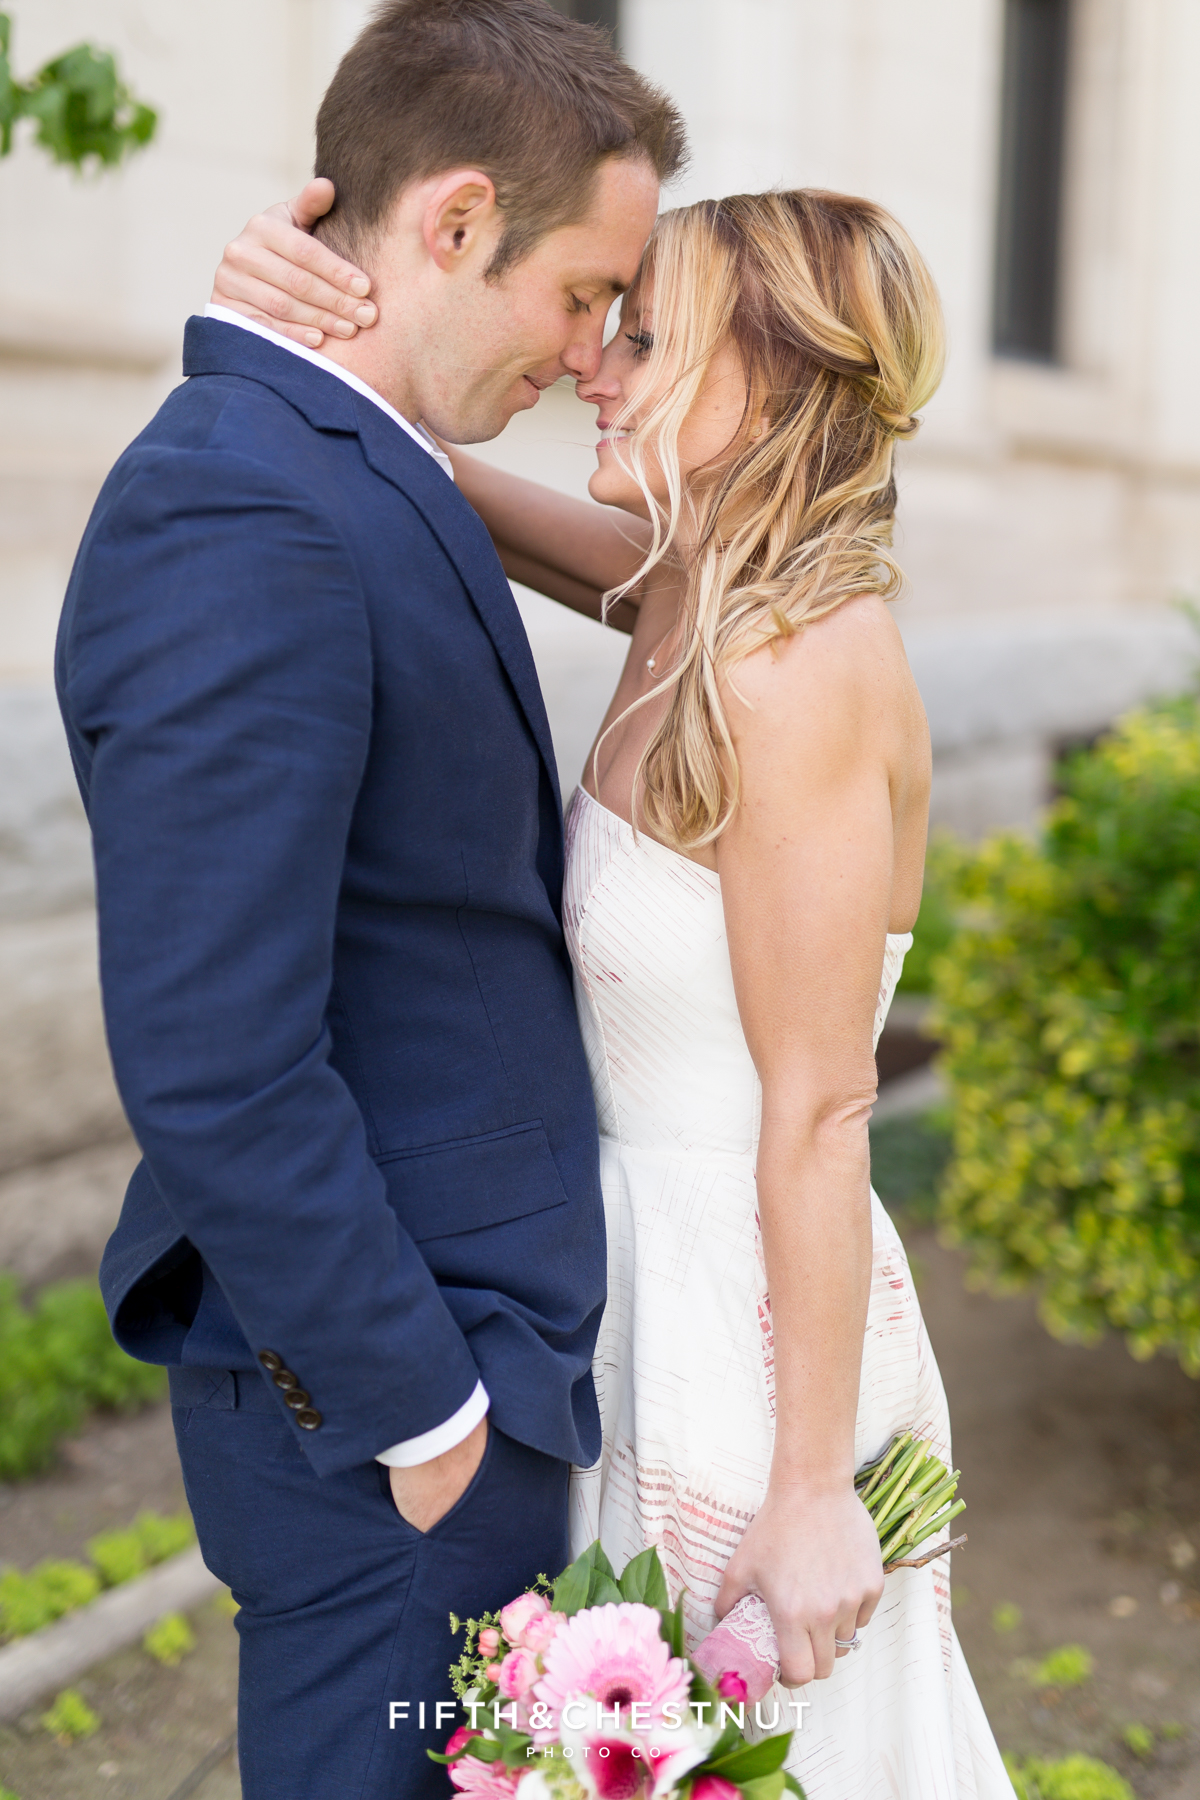 A romantic moment between a bride and groom on their wedding day in Reno by Reno Elopement Photographer